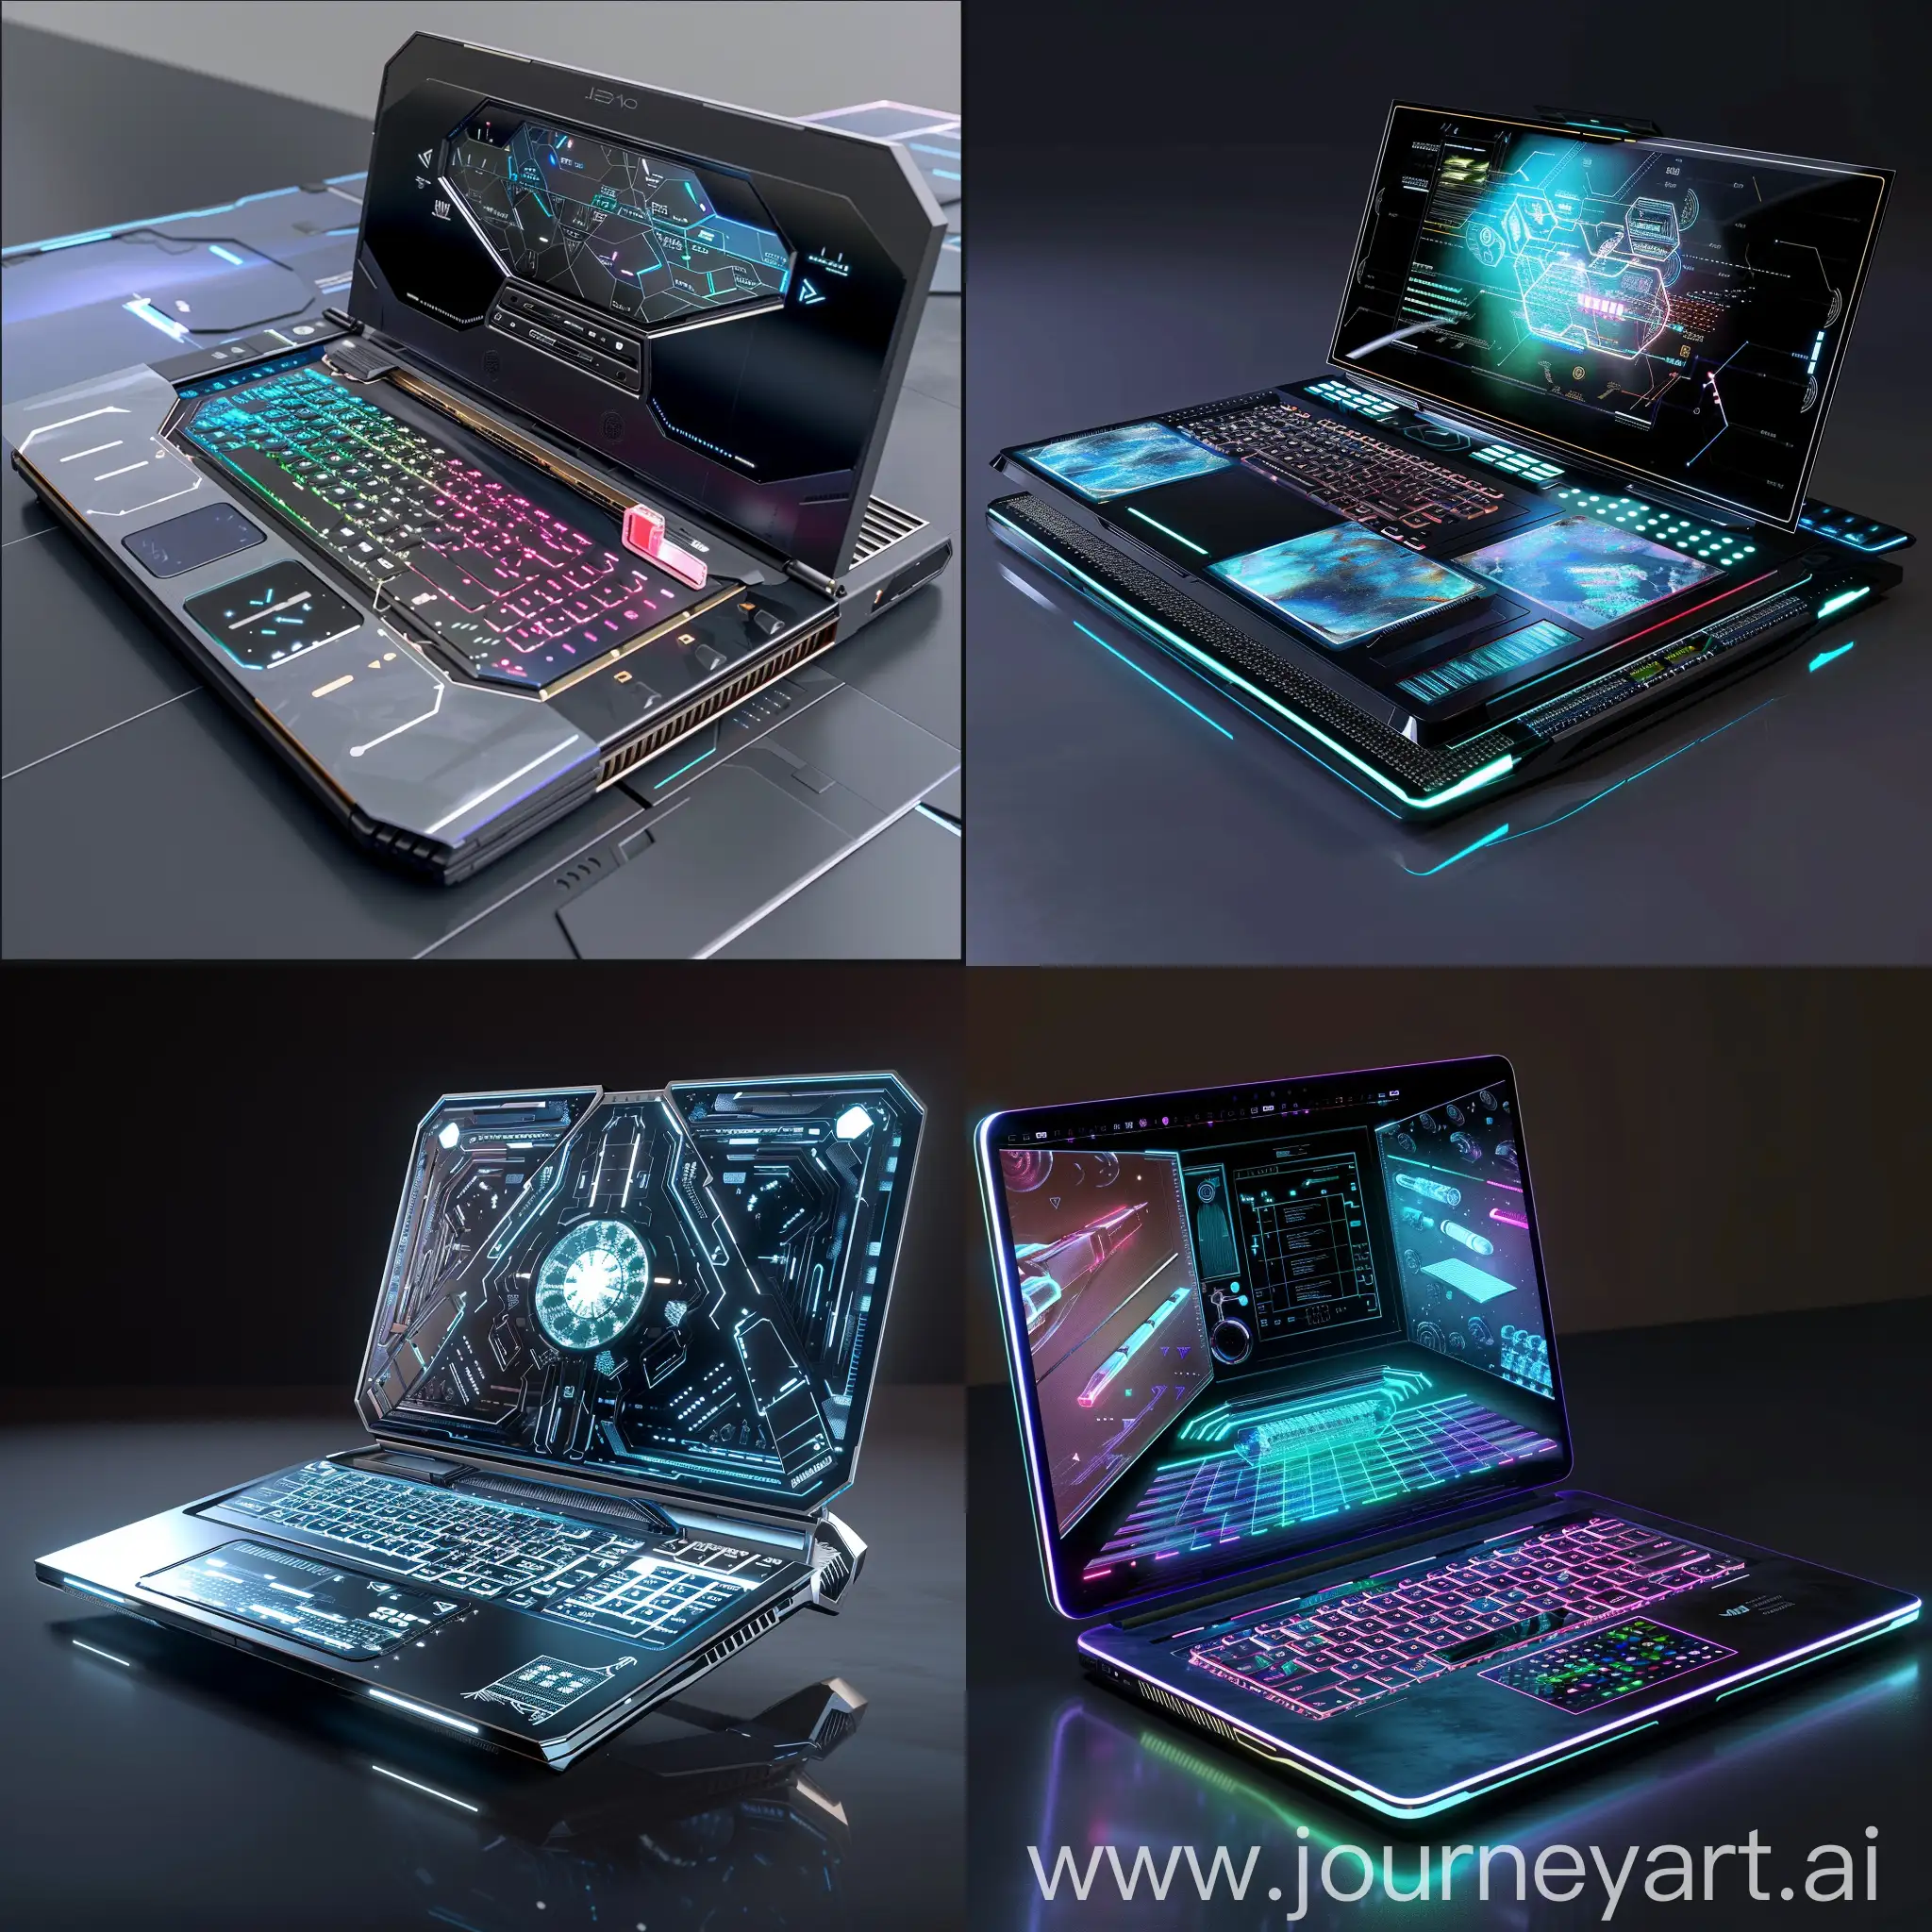 Futuristic-Quantumdot-Laptop-with-AIOptimized-Chipsets-and-Holographic-Storage